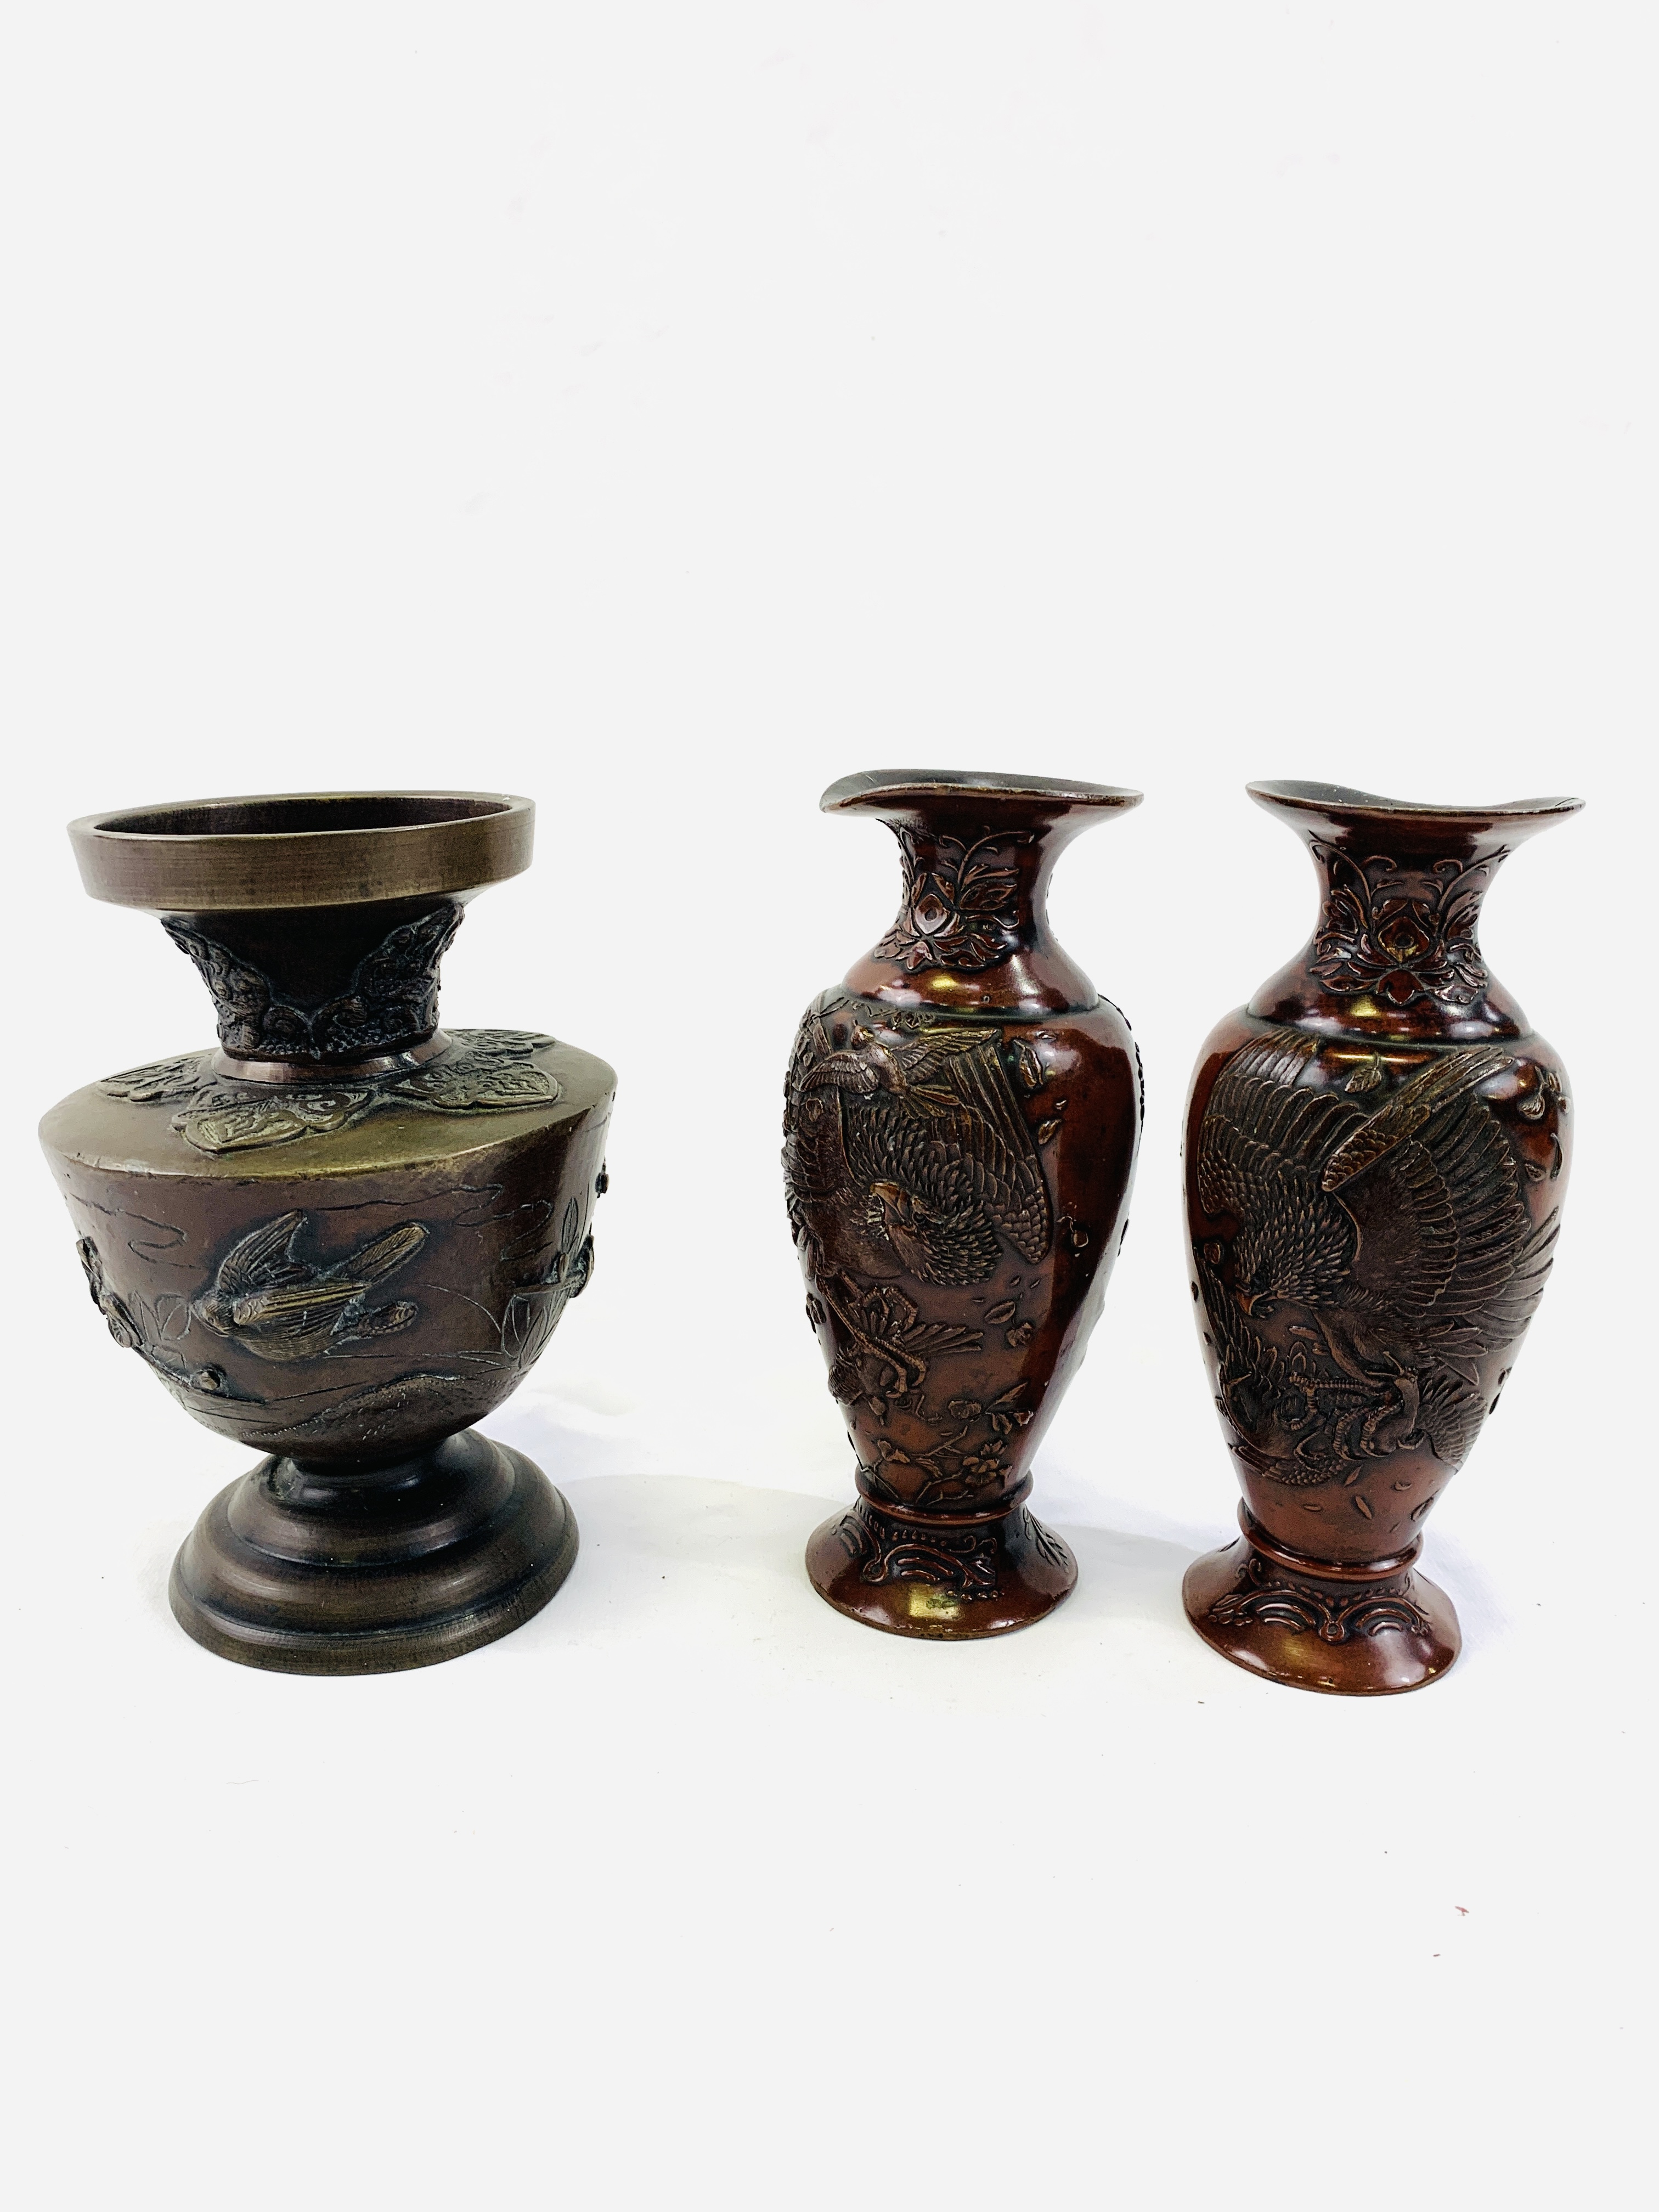 A Meiji period vase together with two other metal vases